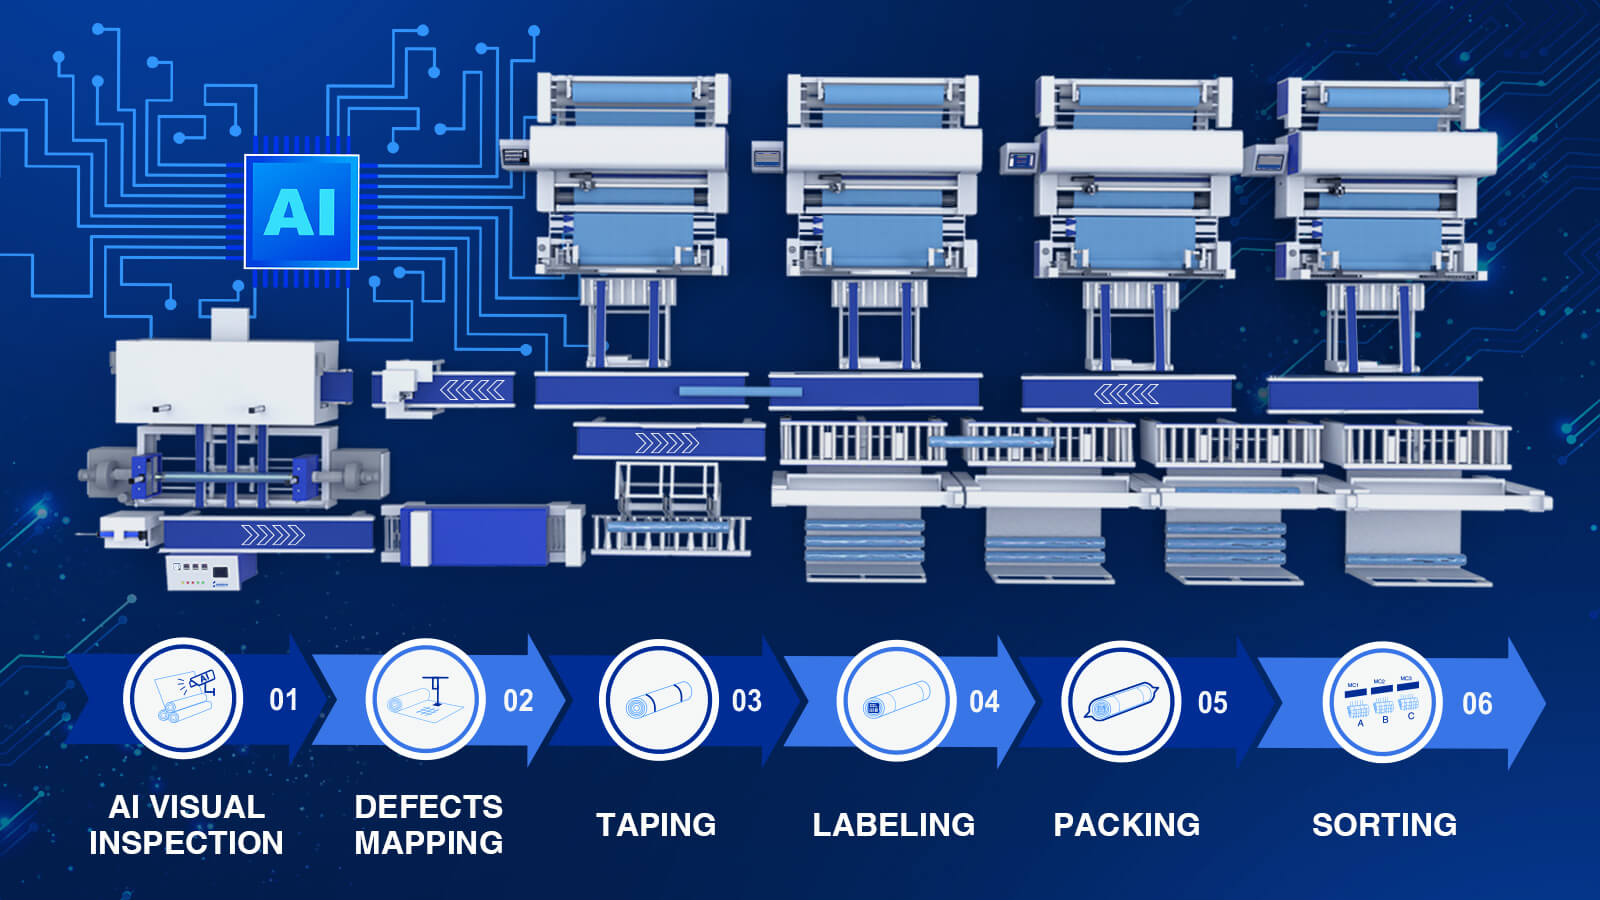 AI visual packing system fully automated process